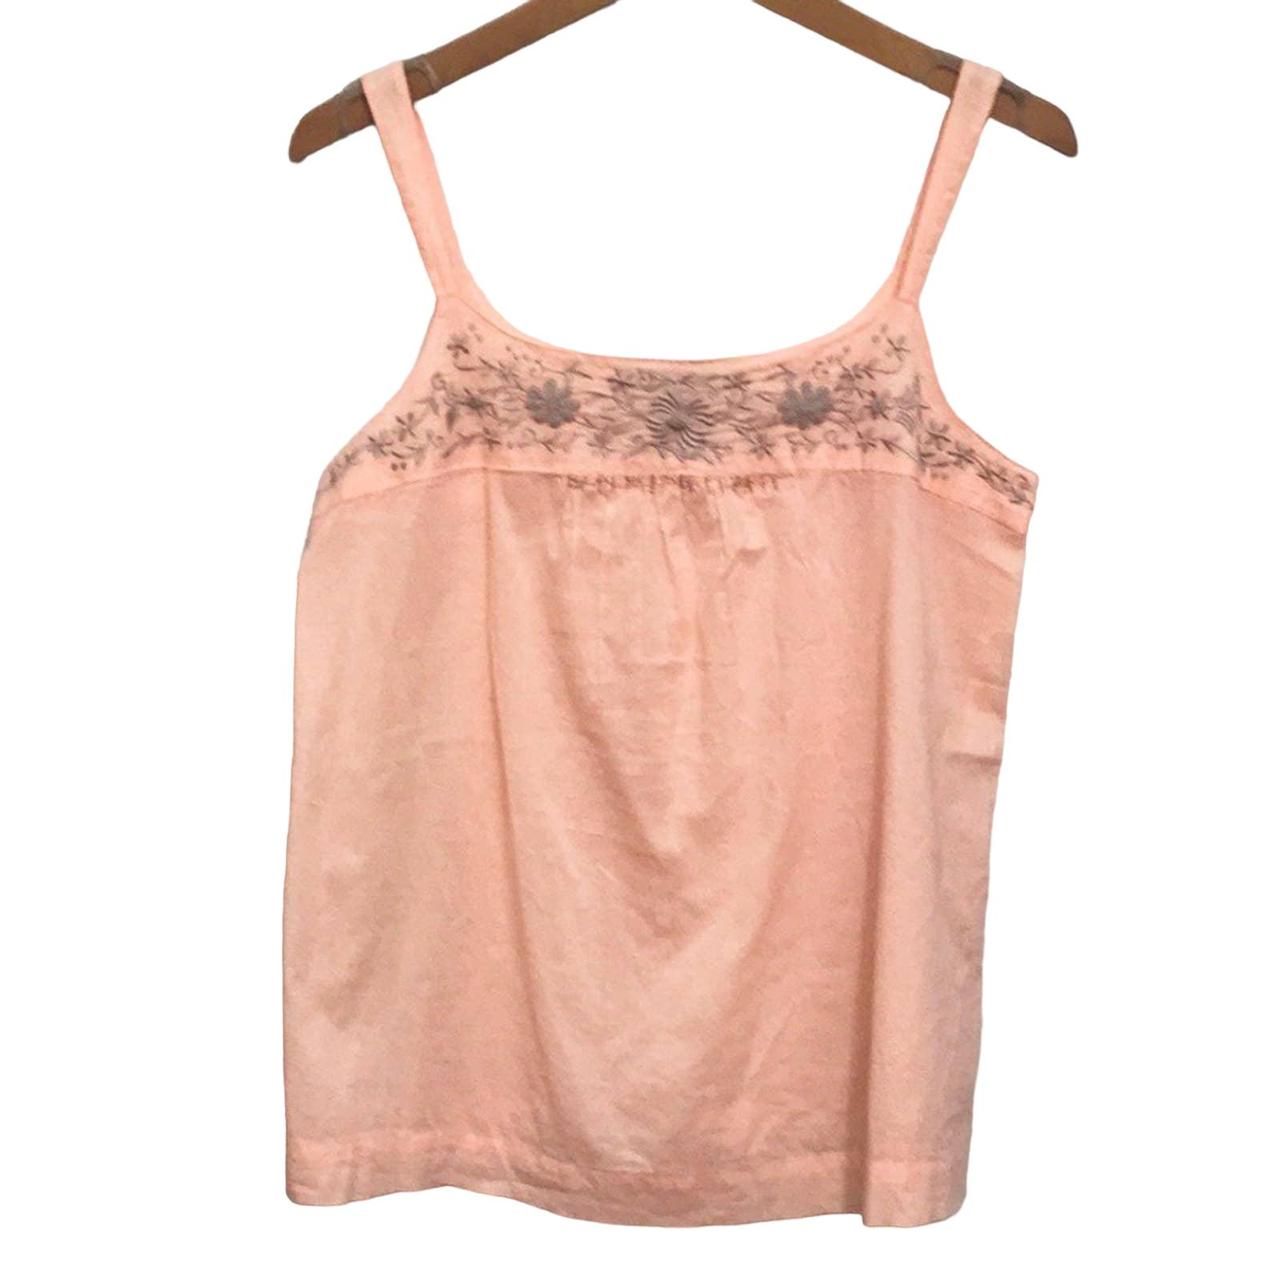 Pretty Camisole Top by Luck Brand Peachy Pink with - Depop